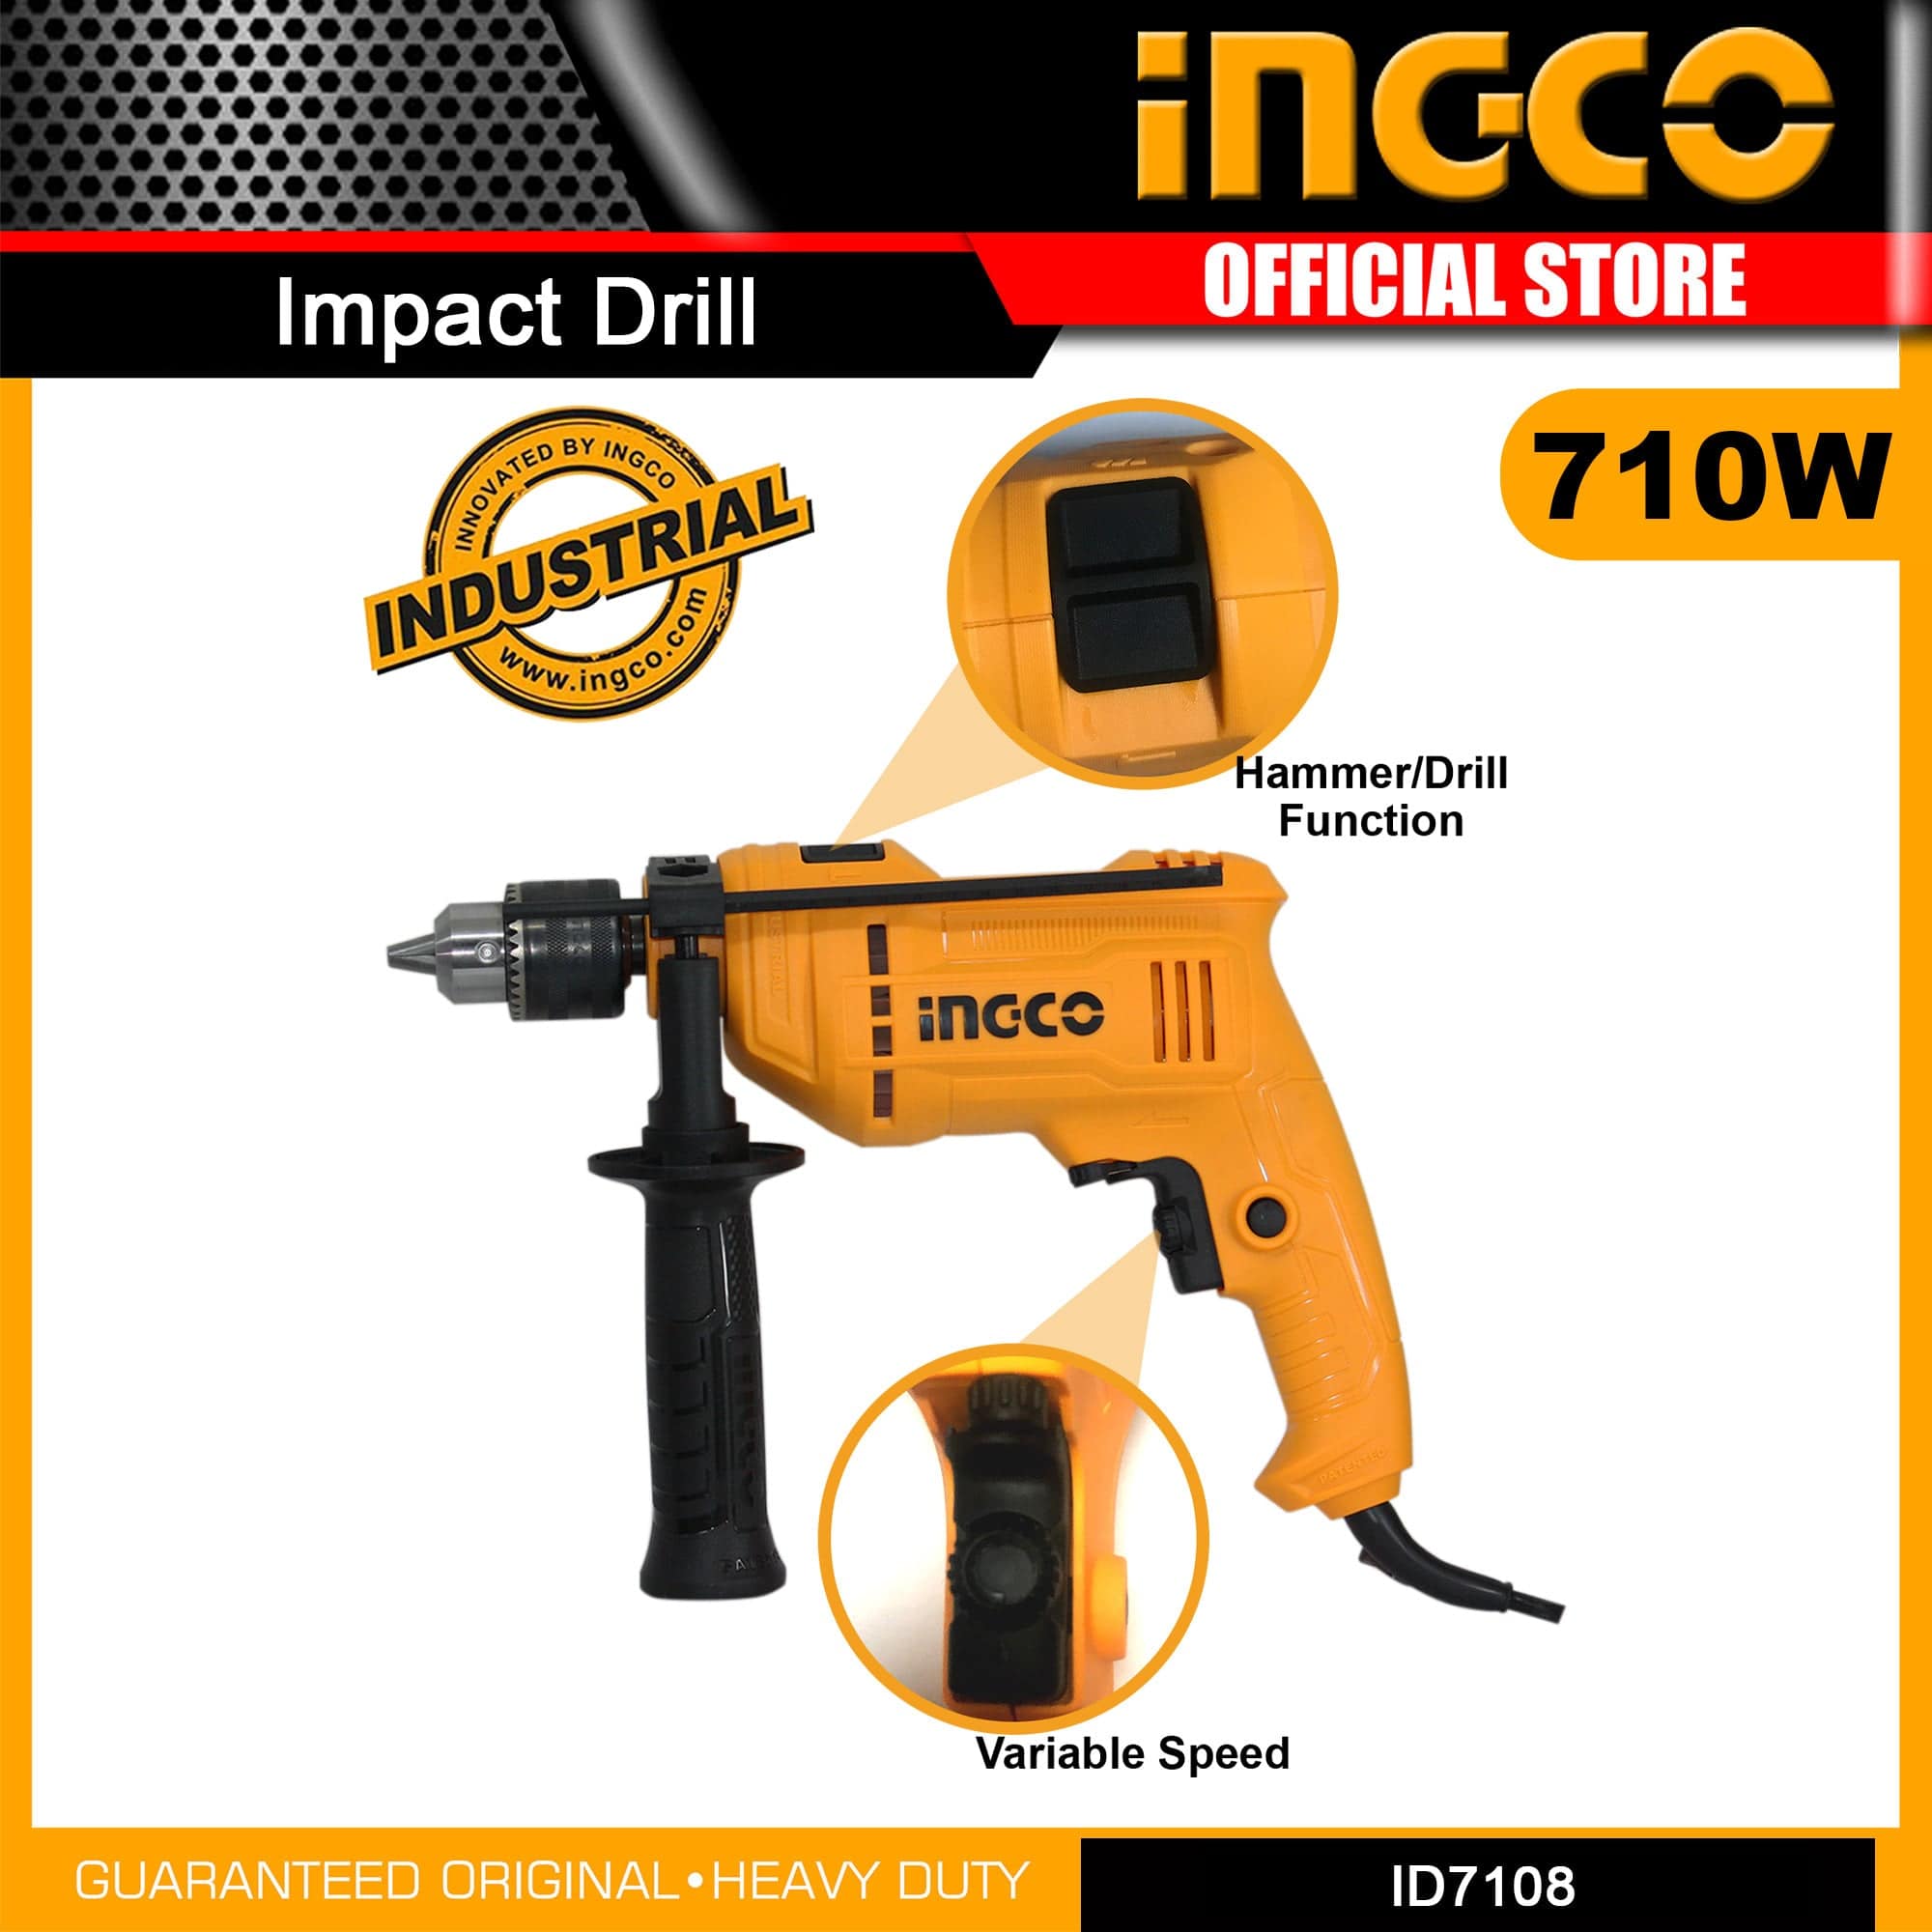 Ingco Hammer Impact Drill 13mm 710W - ID7108 - Buy Online in Accra, Ghana at Supply Master Drill Buy Tools hardware Building materials